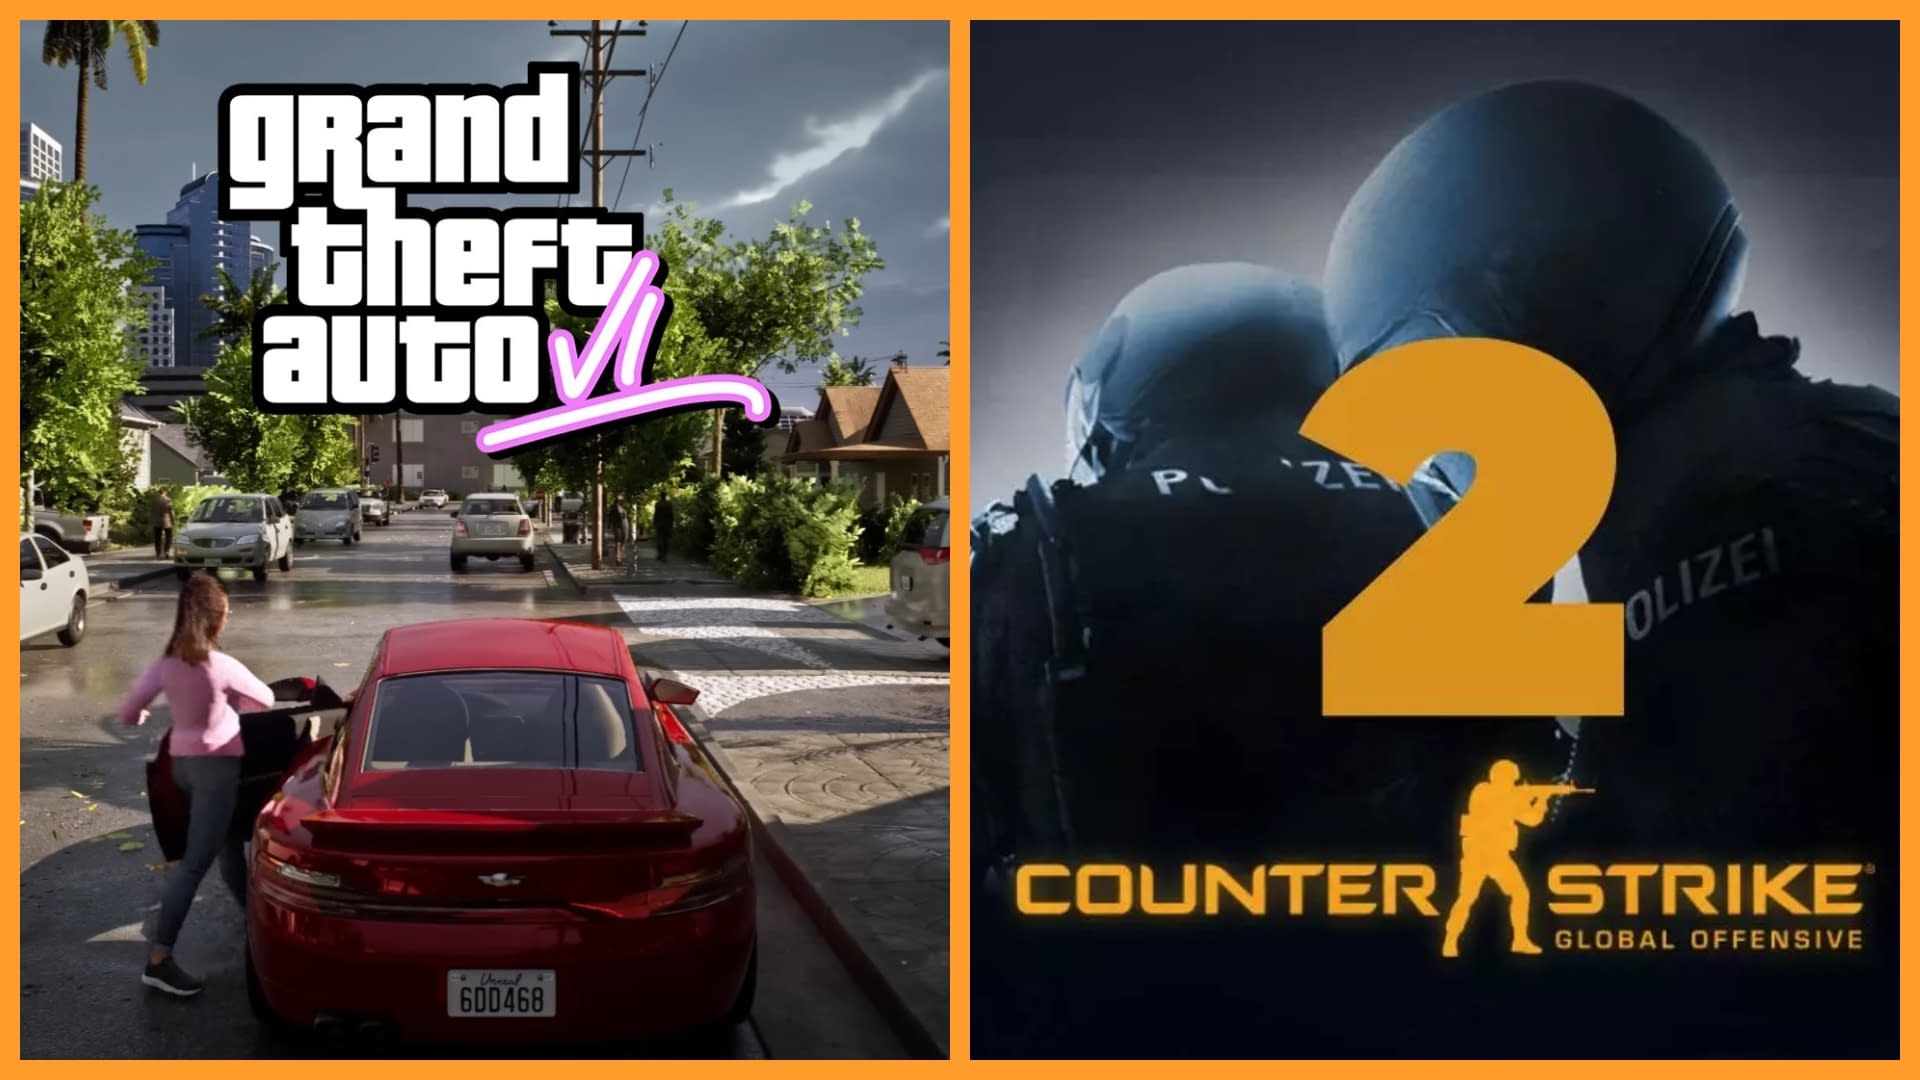 Game agenda 2si1: News from GTA 6 and CS:GO 2